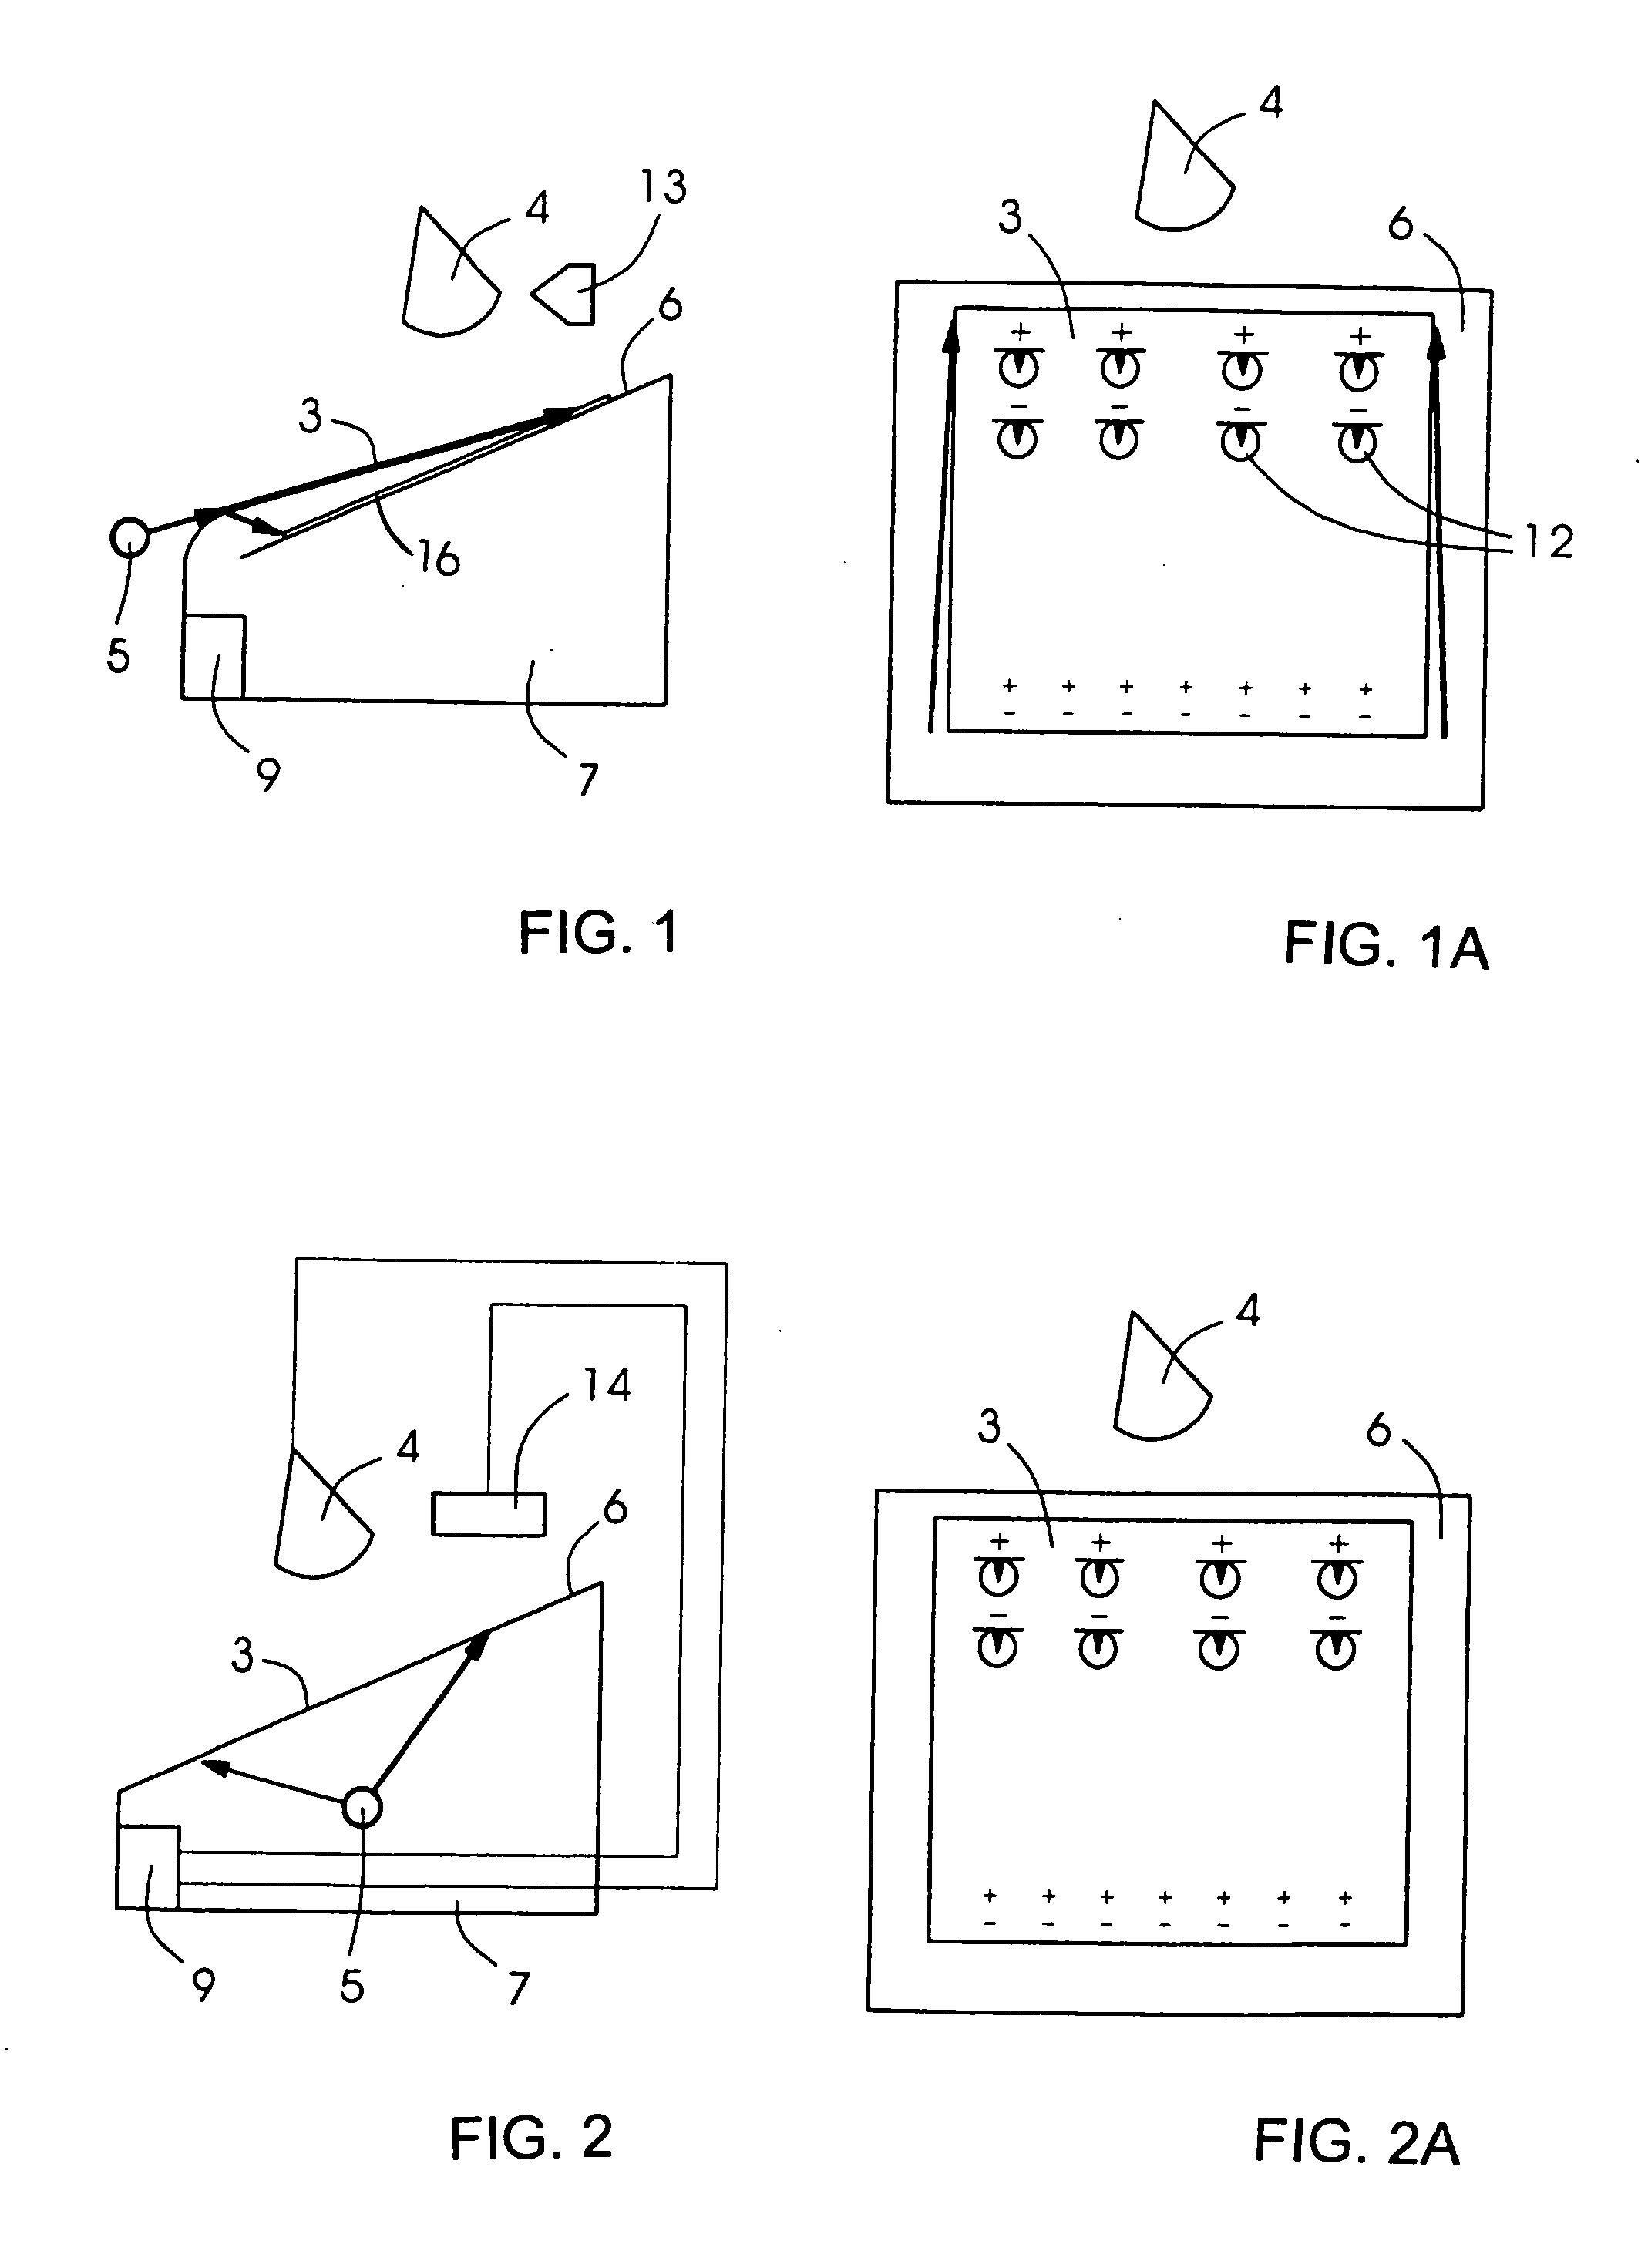 Projection-area dependent display/operating device